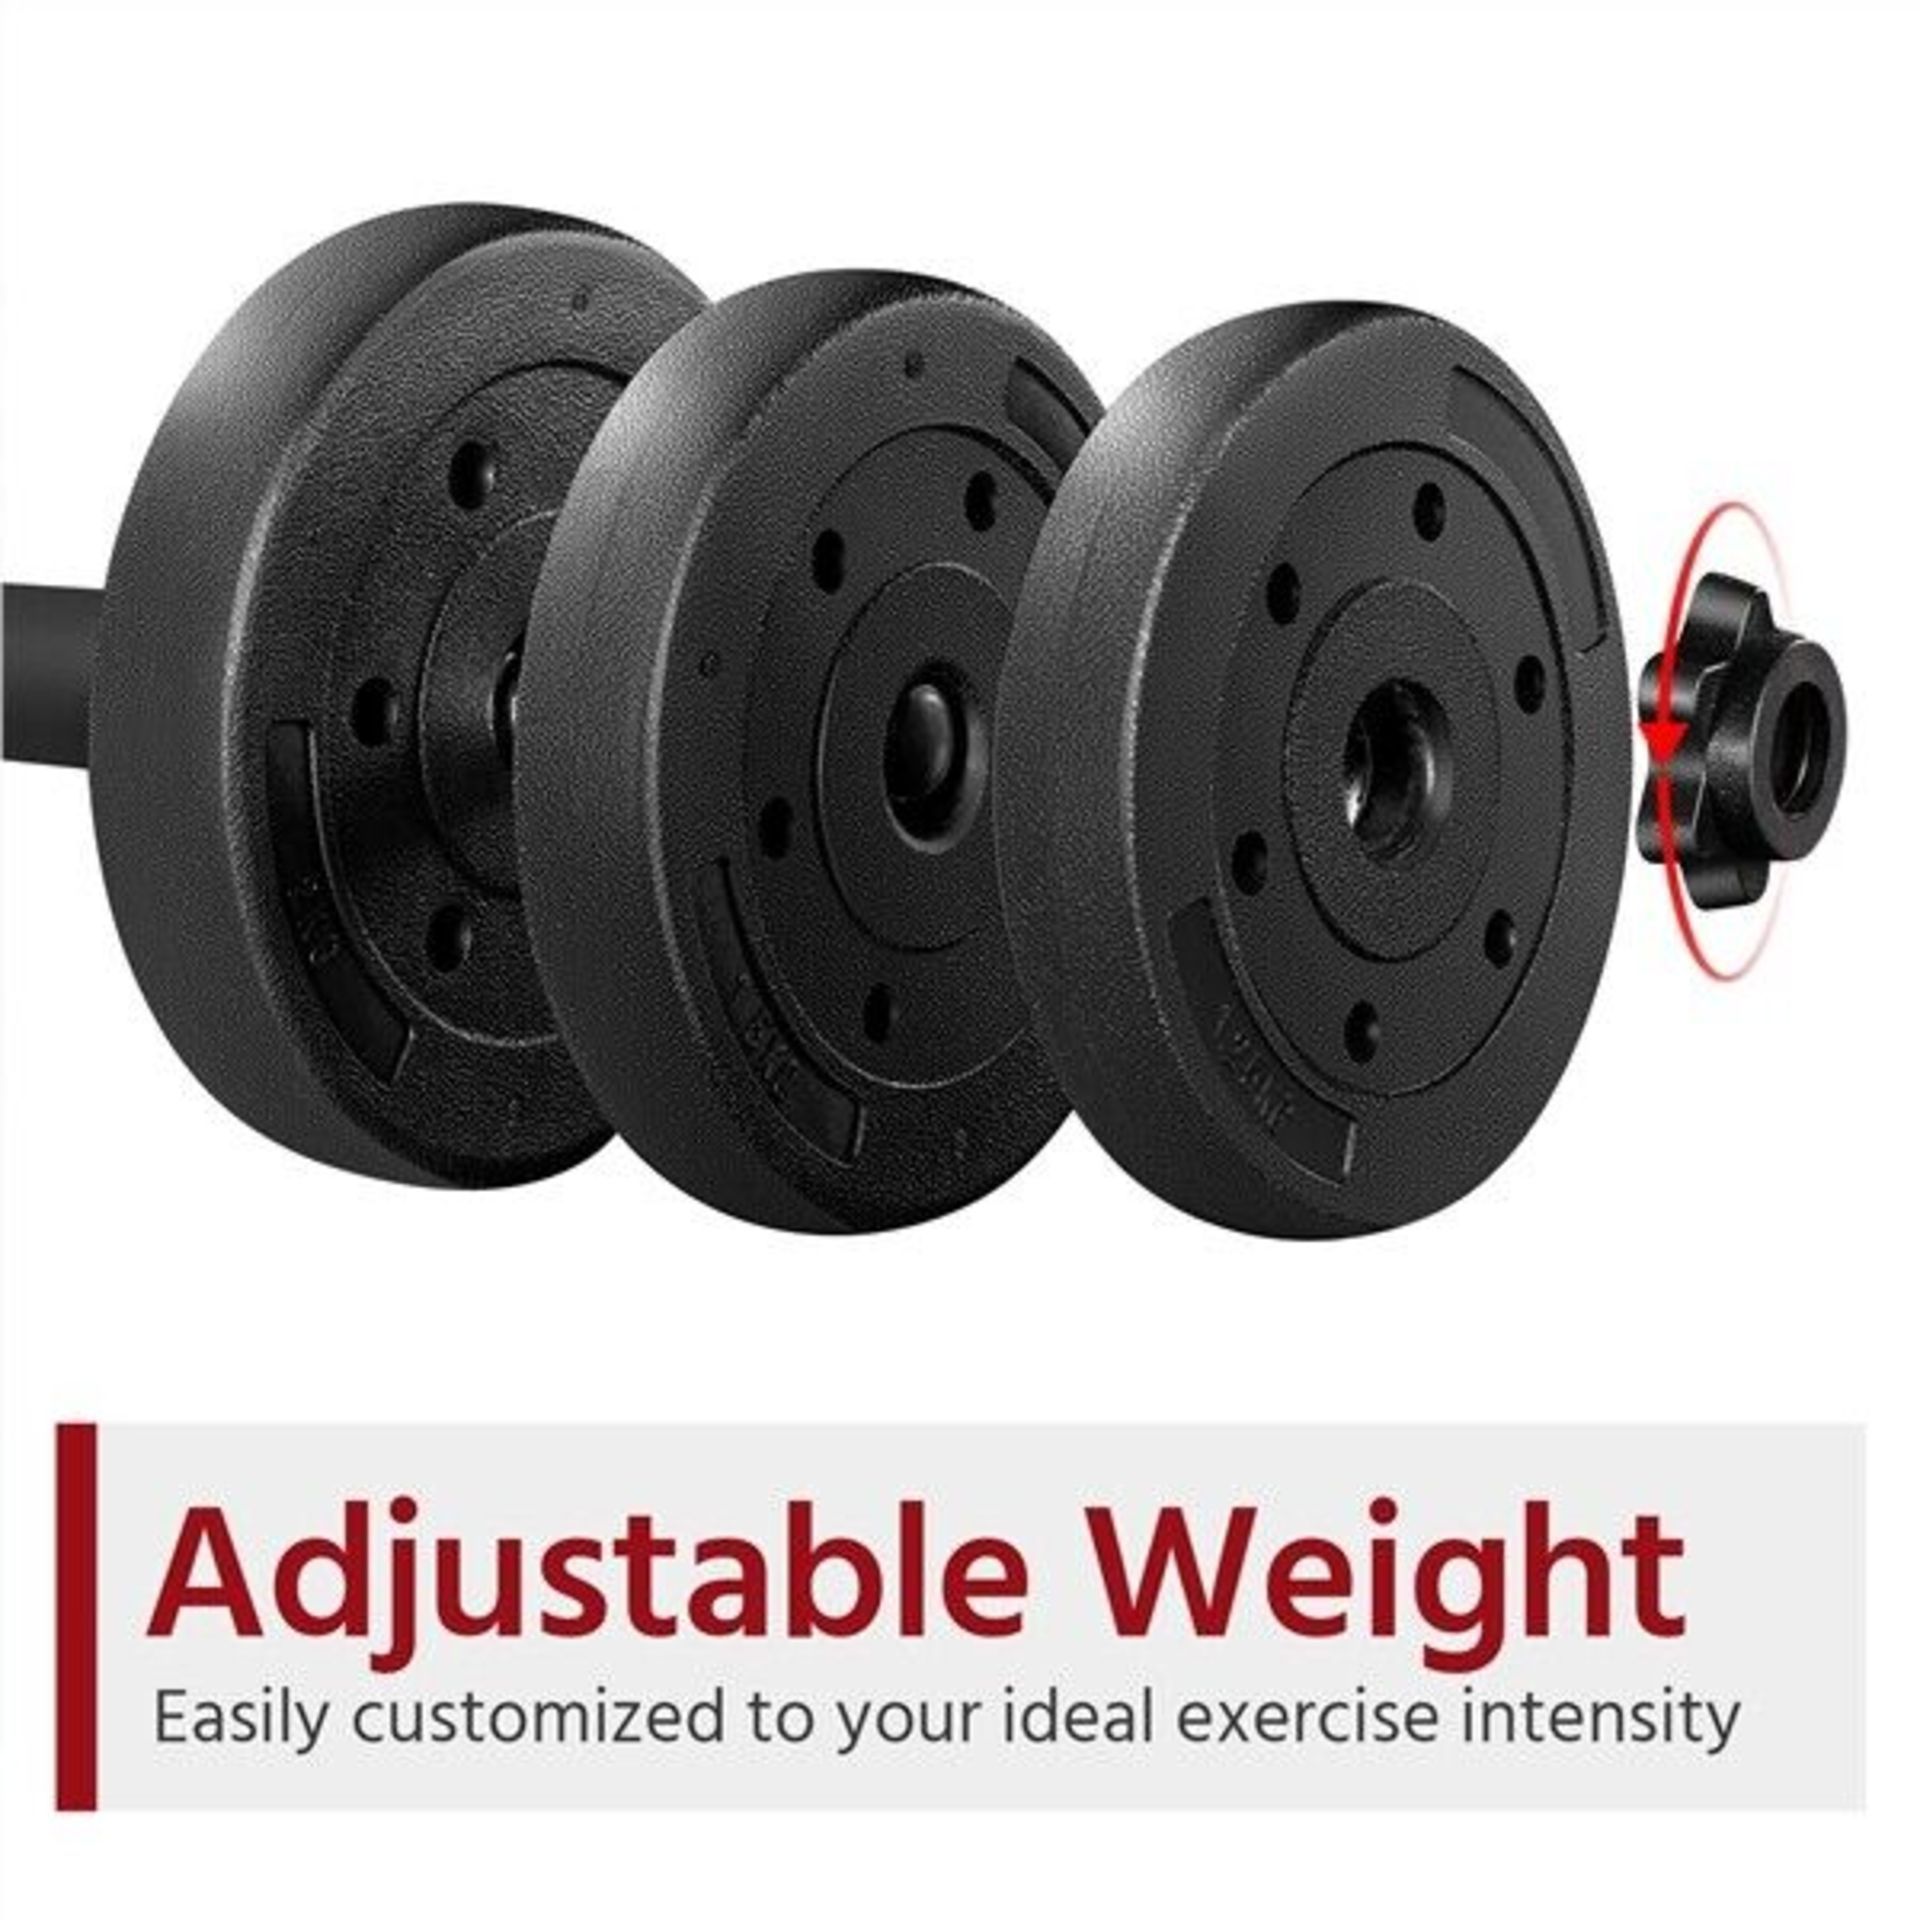 PALLET TO CONTAIN 36 x SETS OF 2 - 20KG ADJUSTABLE WEIGHT DUMBBELL SETS. (PALLET ID: 17) EACH SET - Image 2 of 8